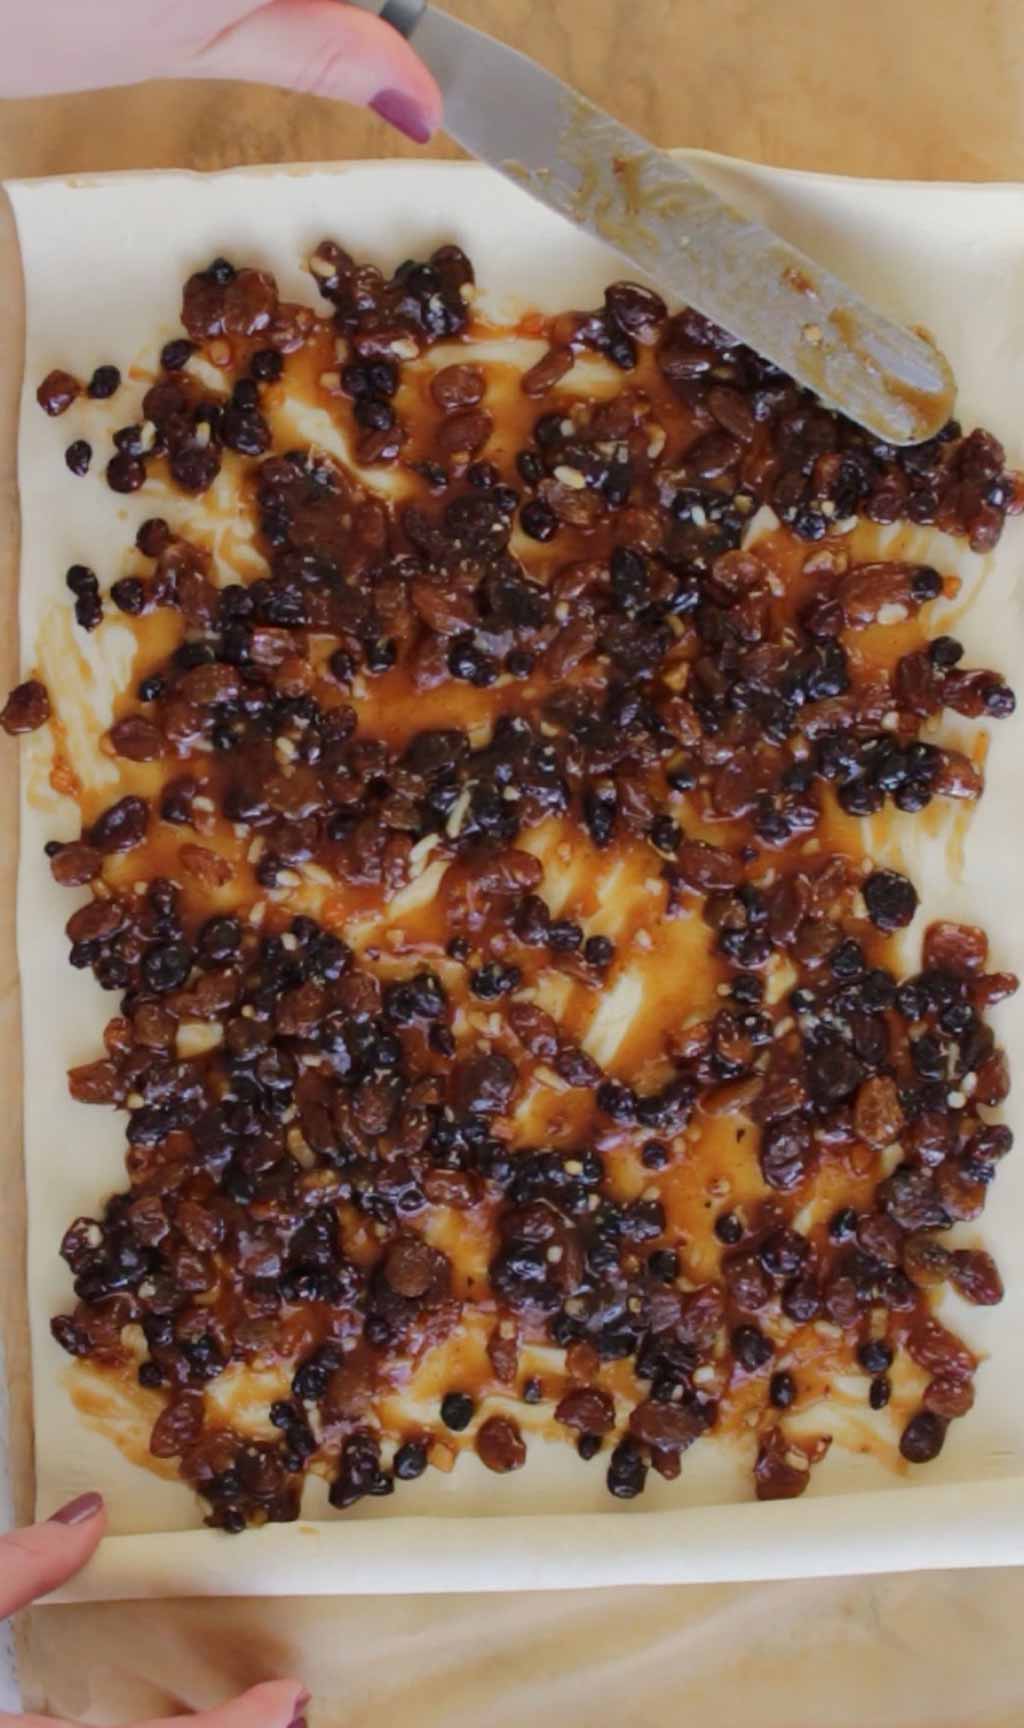 Spreading Mincemeat Over The Puff Pastry Sheet